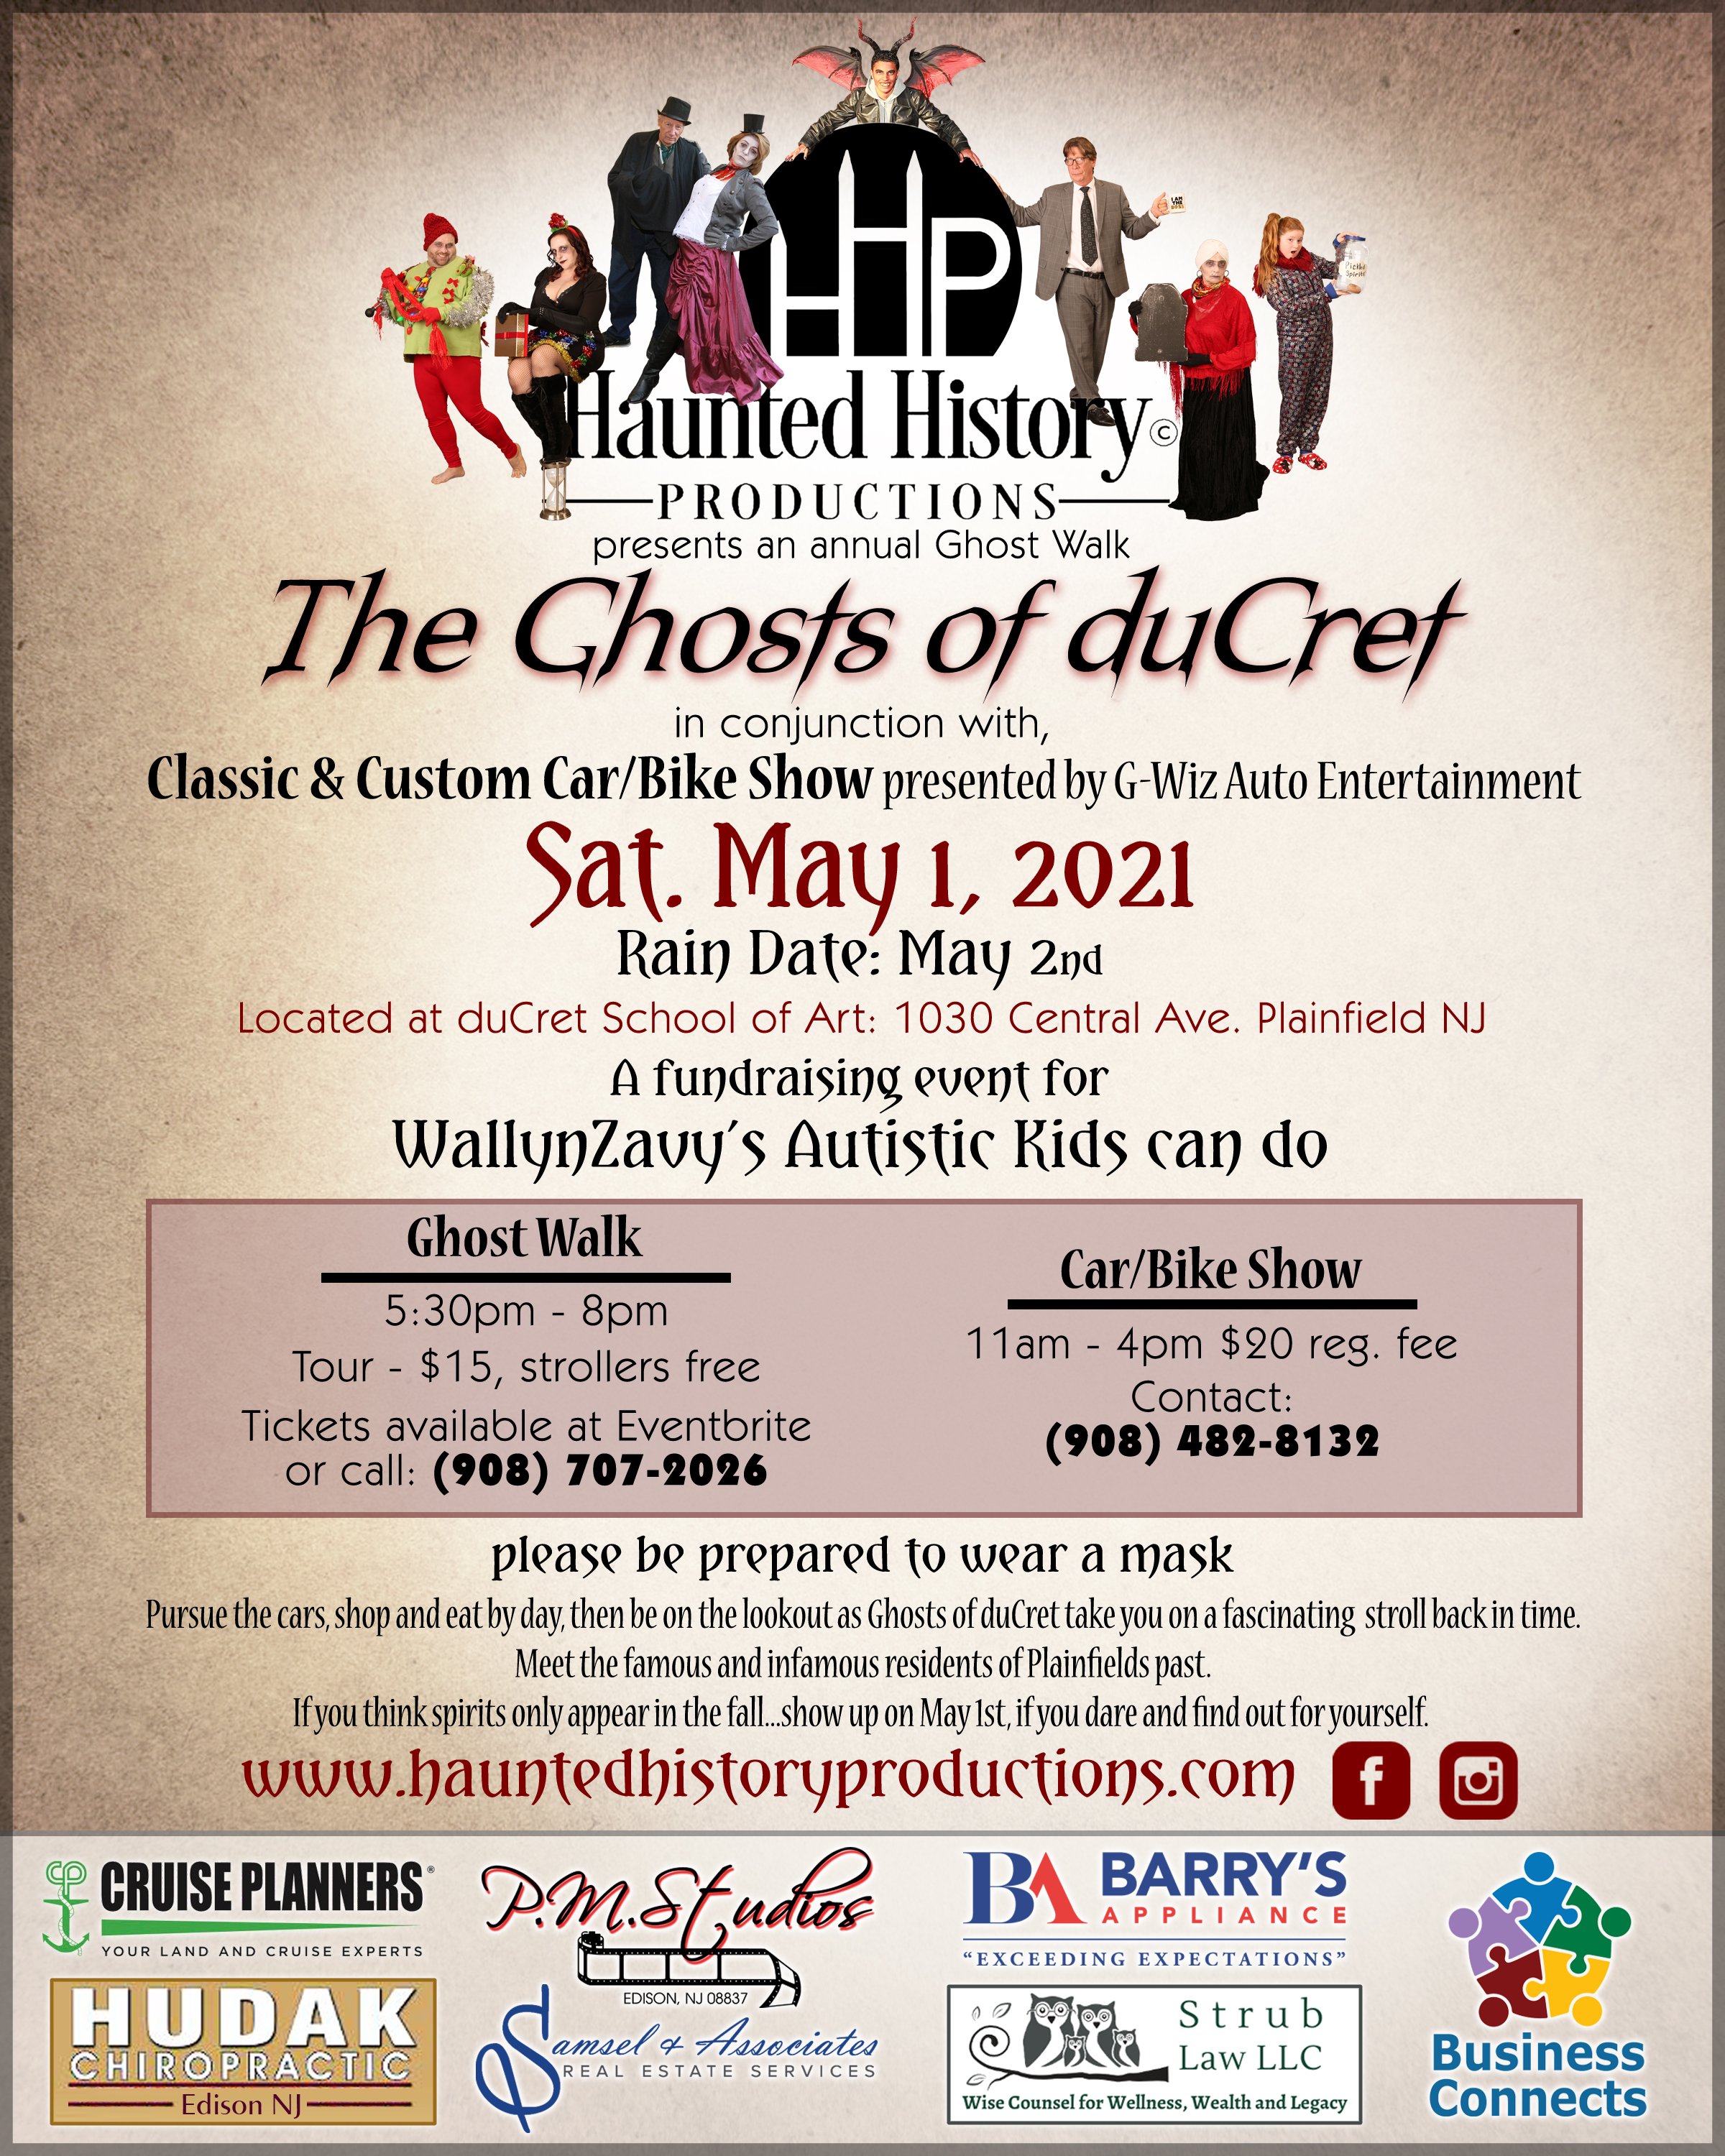 Haunted History Productions May 1 event Business Connects Networking 